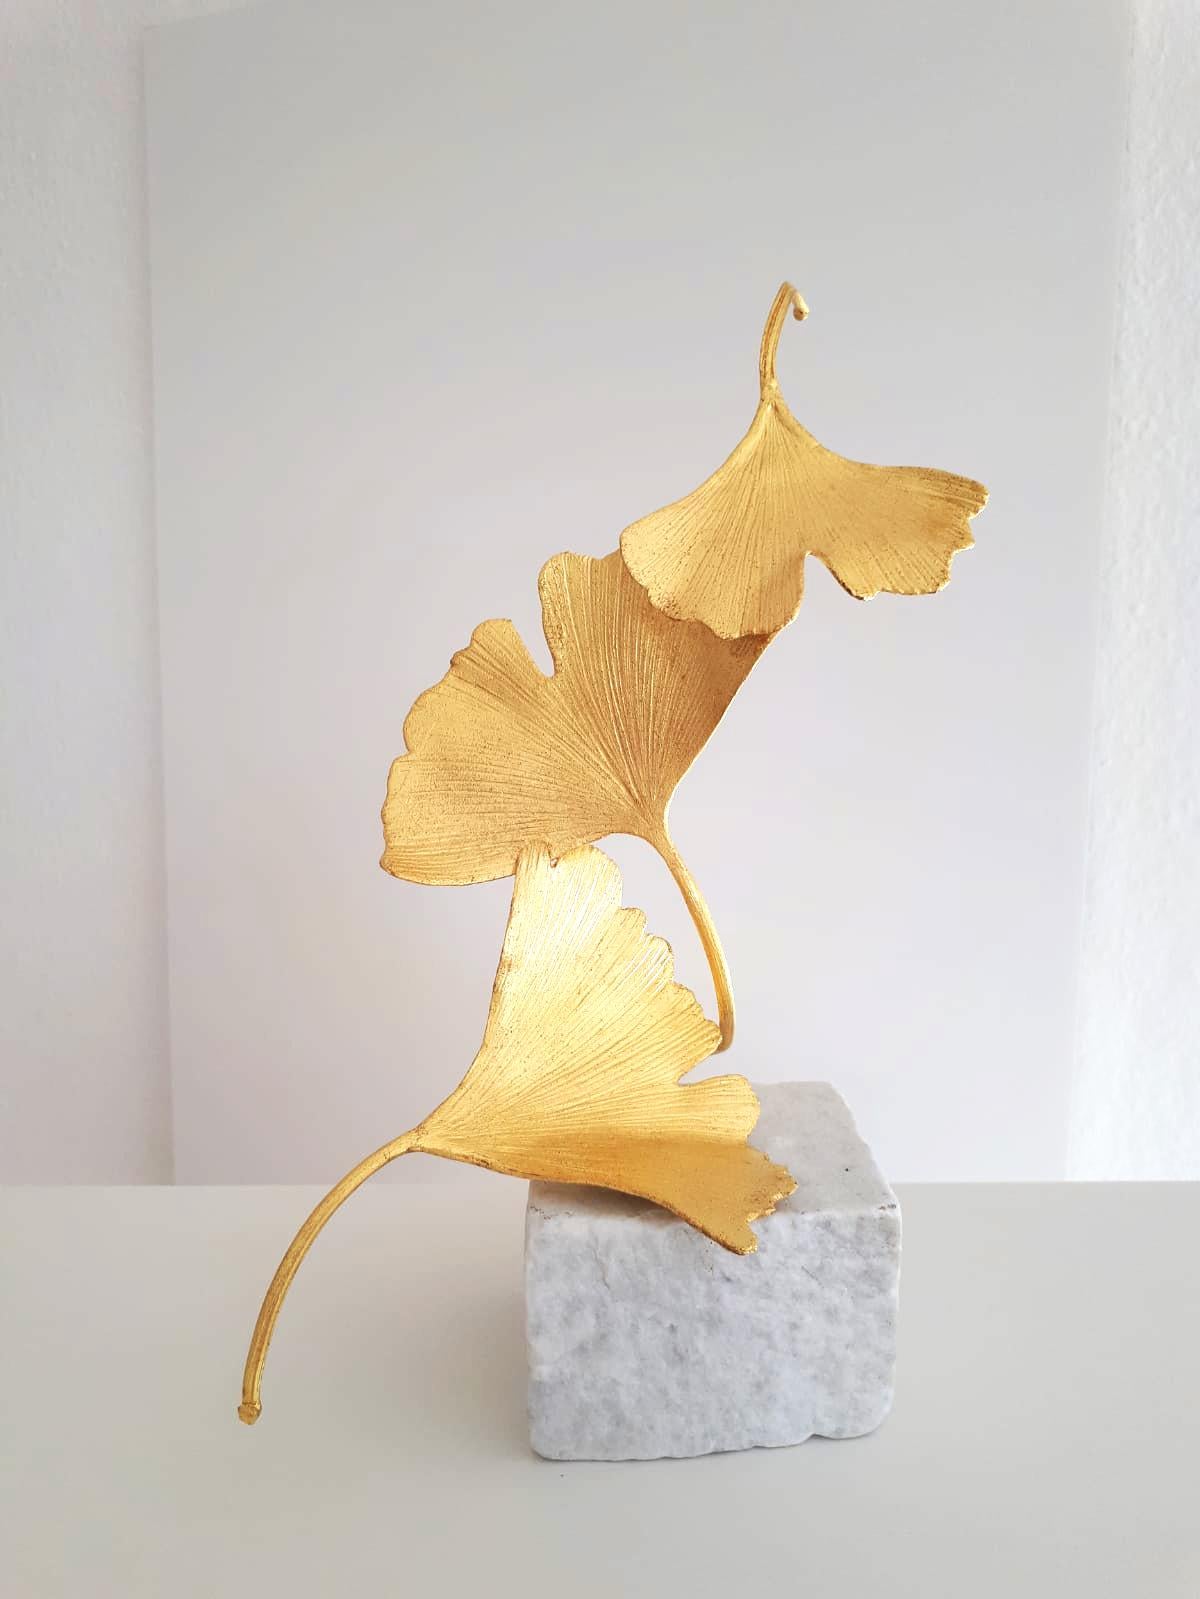 Golden Gingko by Kuno Vollet - Cast Brass gilded sculpture on white marble base 2